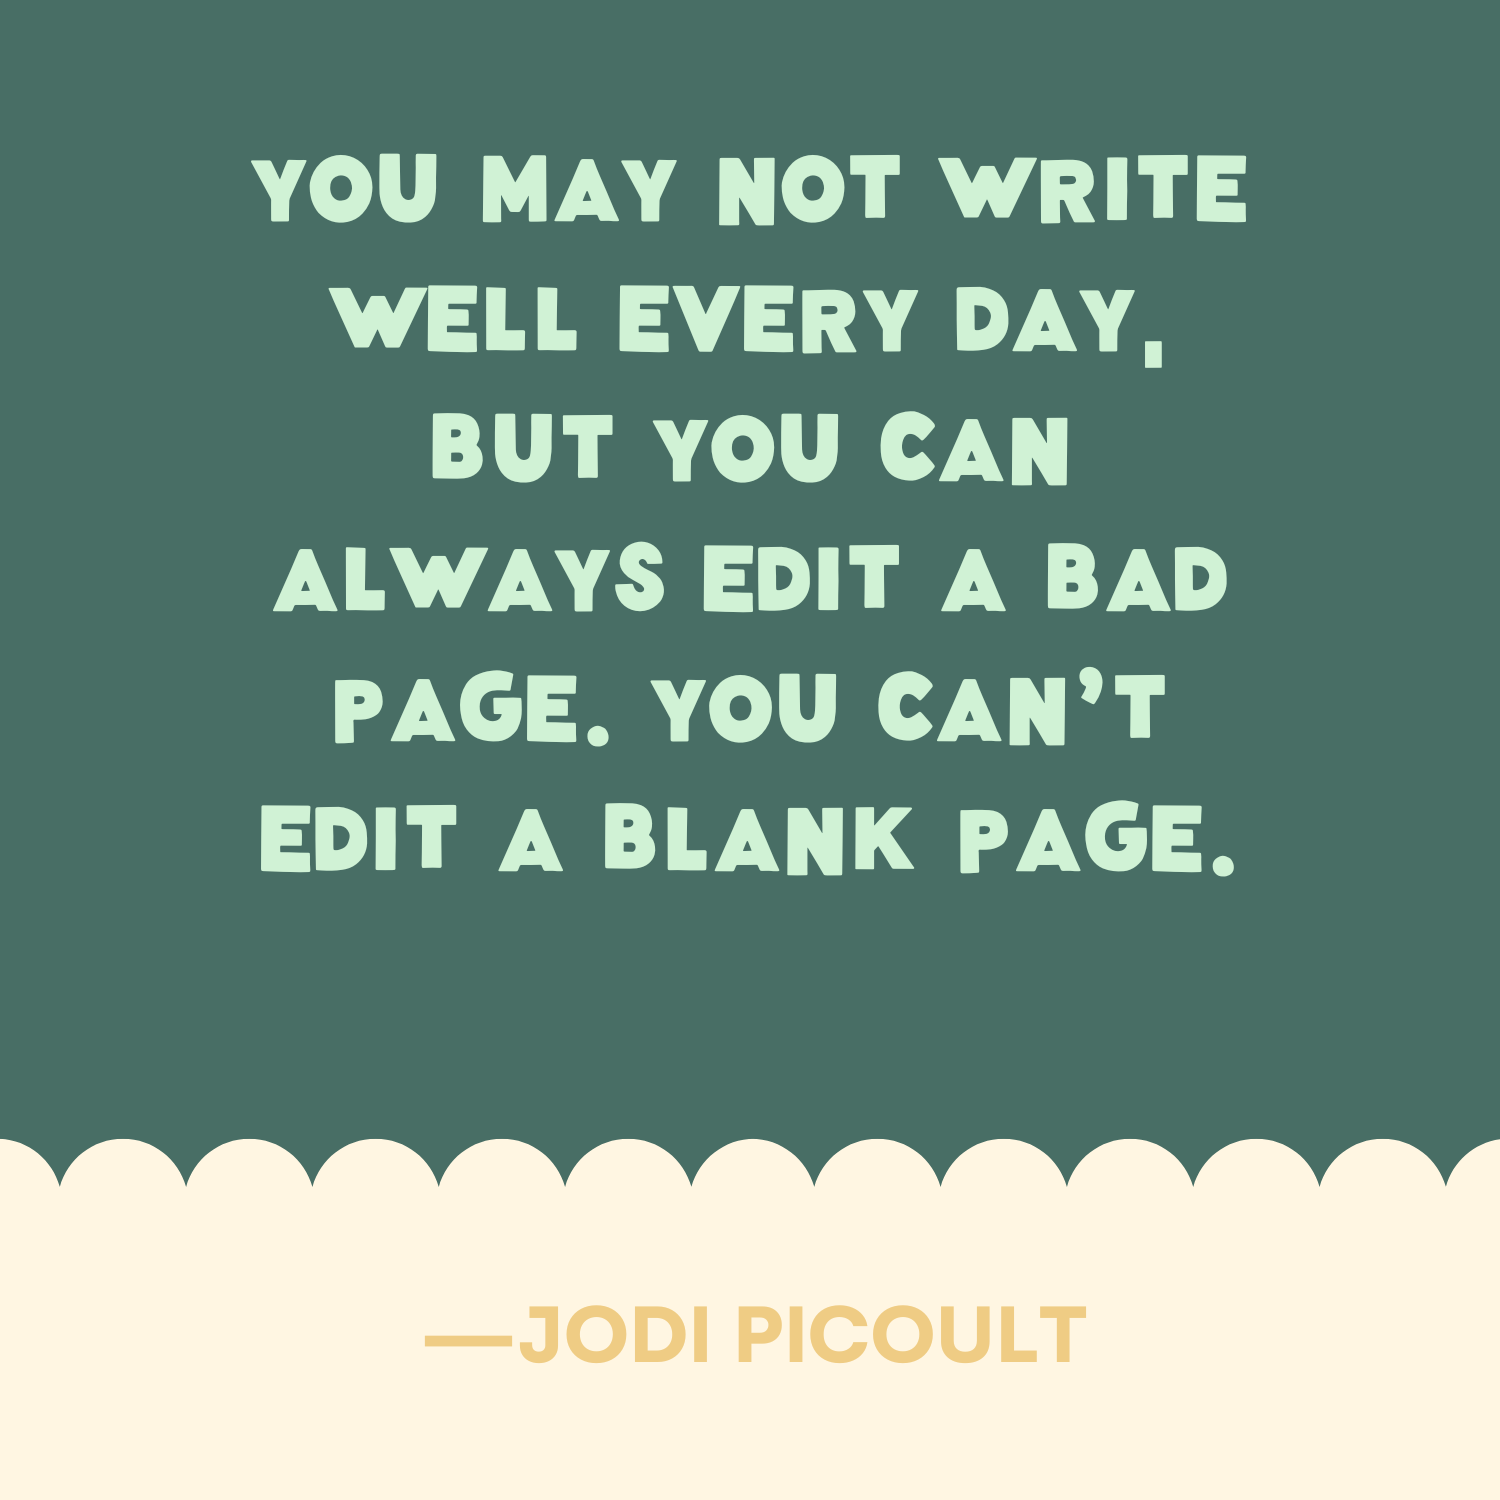 <p><strong>"</strong>You may not write well every day, but you can always edit a bad page. You can't edit a blank page." —Jodi Picoult</p>